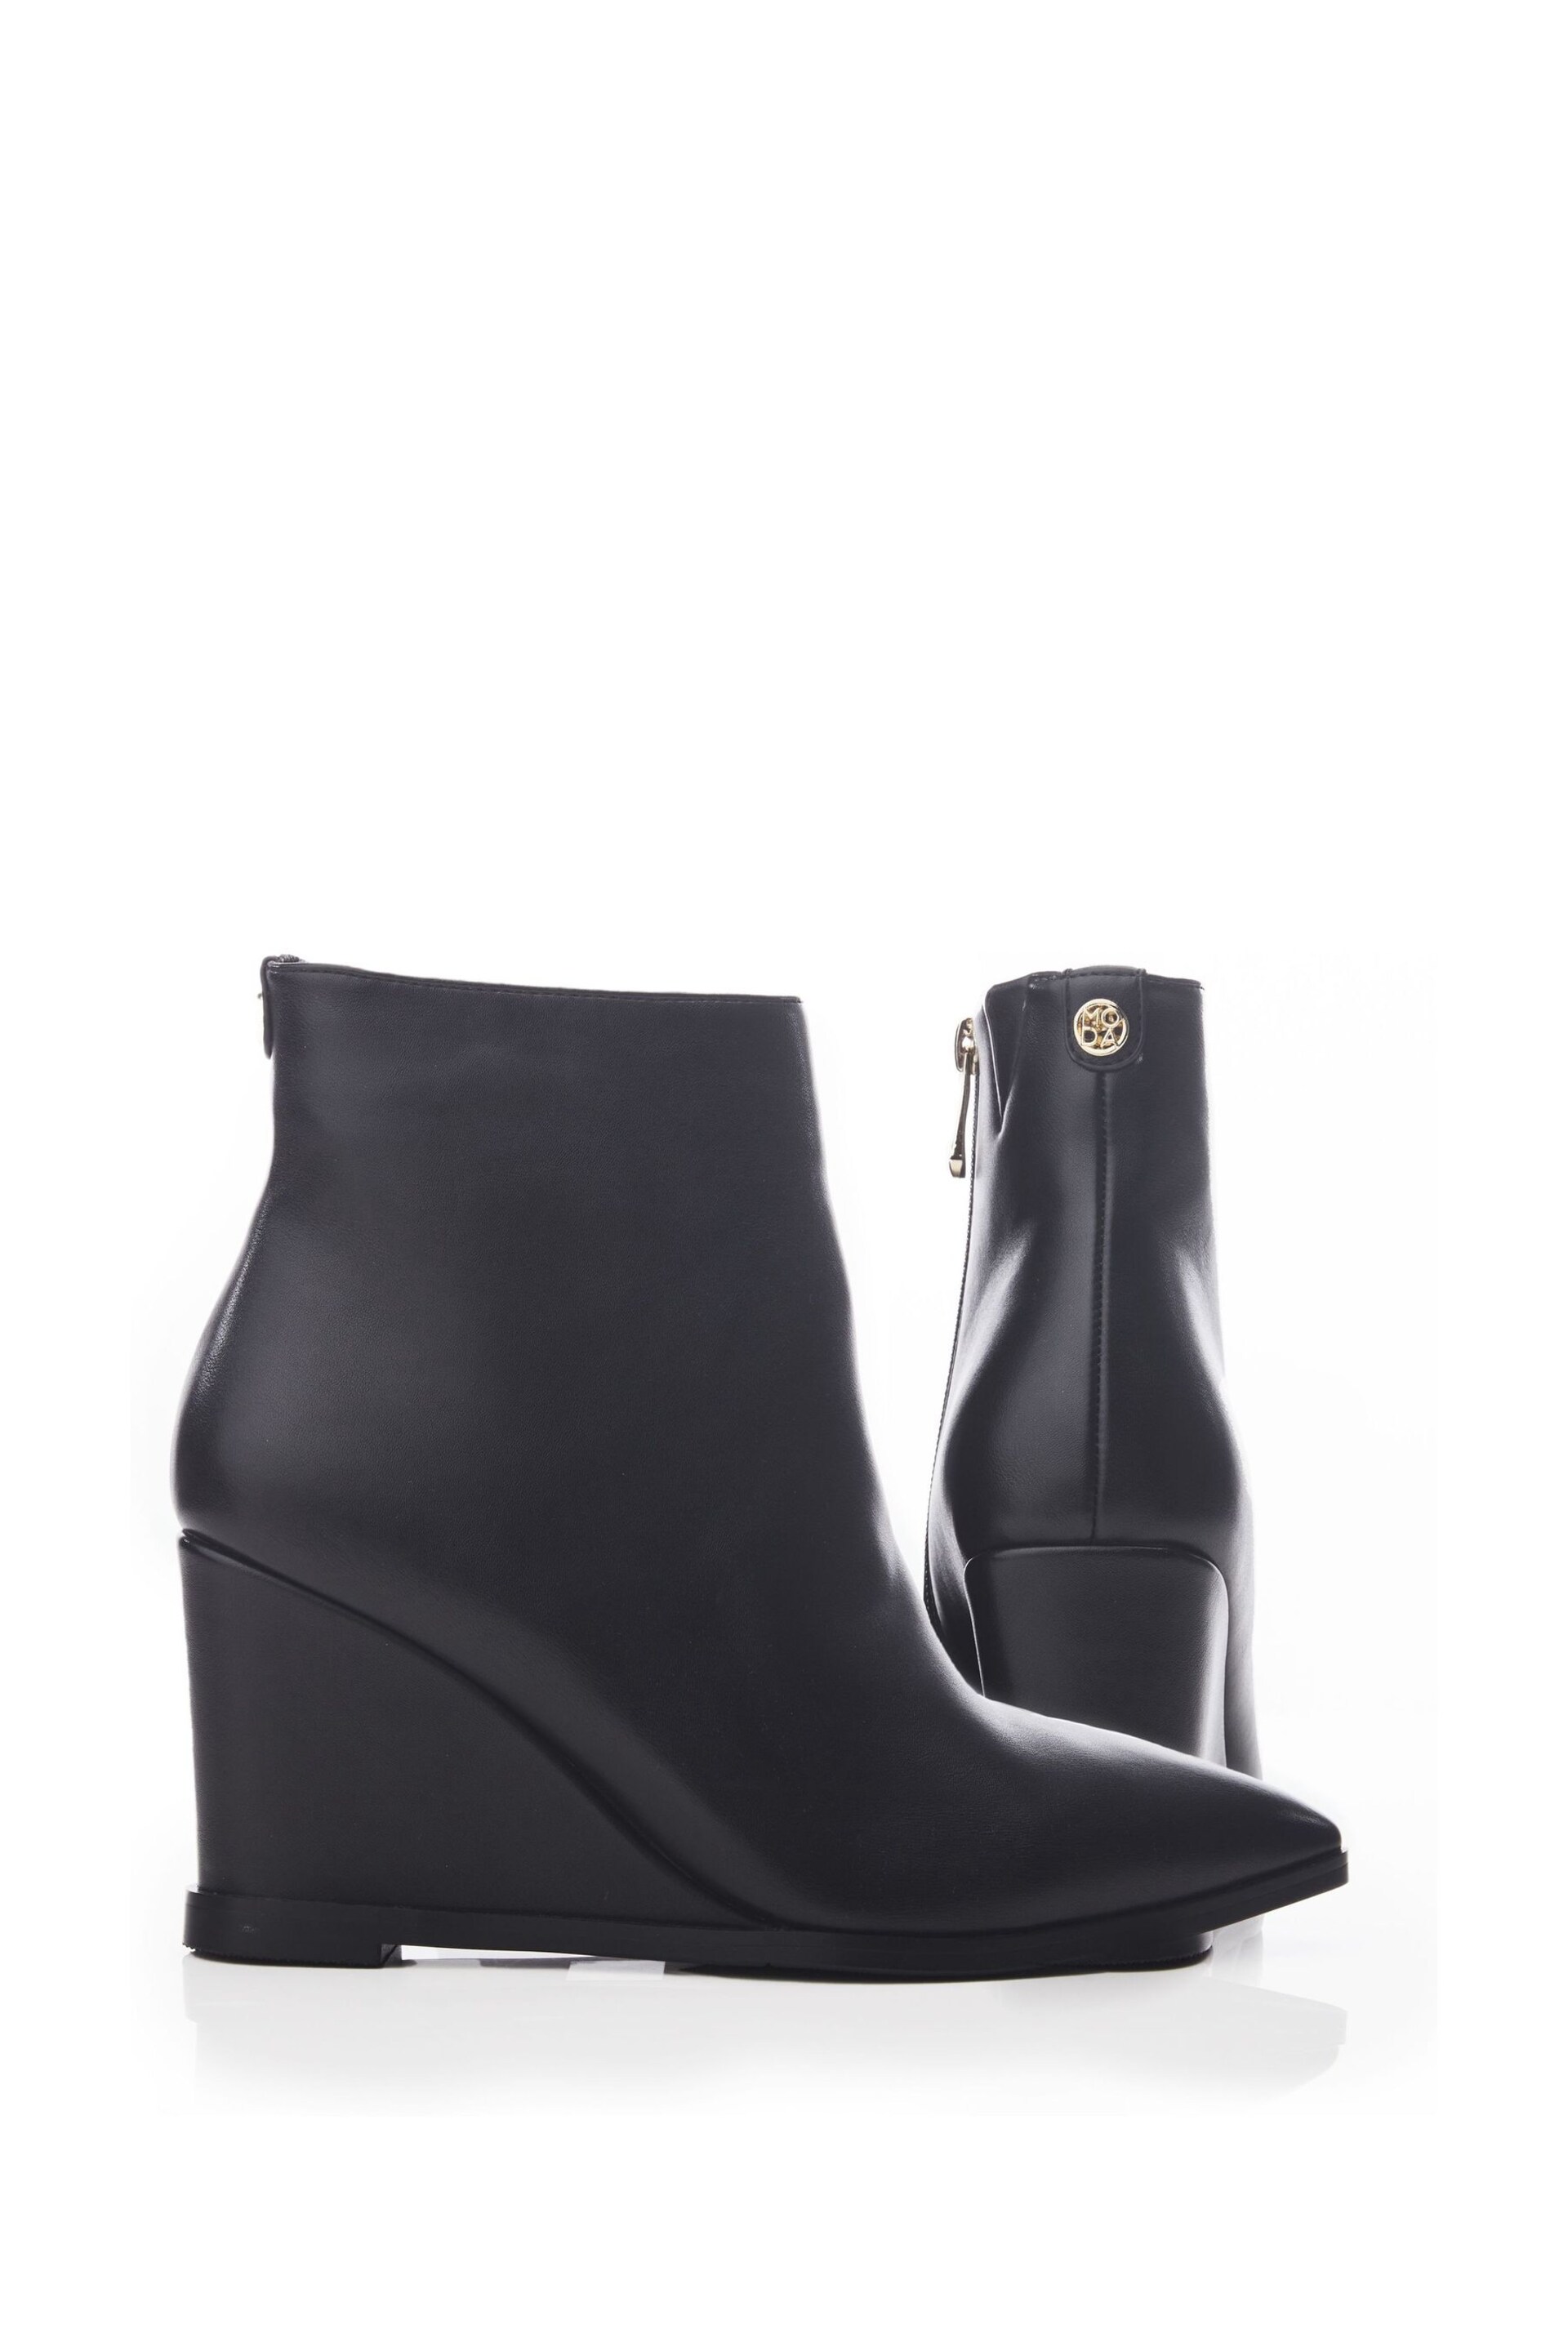 Moda in Pelle Nammie Pointed Toe Wedge Black Ankle Boots - Image 2 of 4